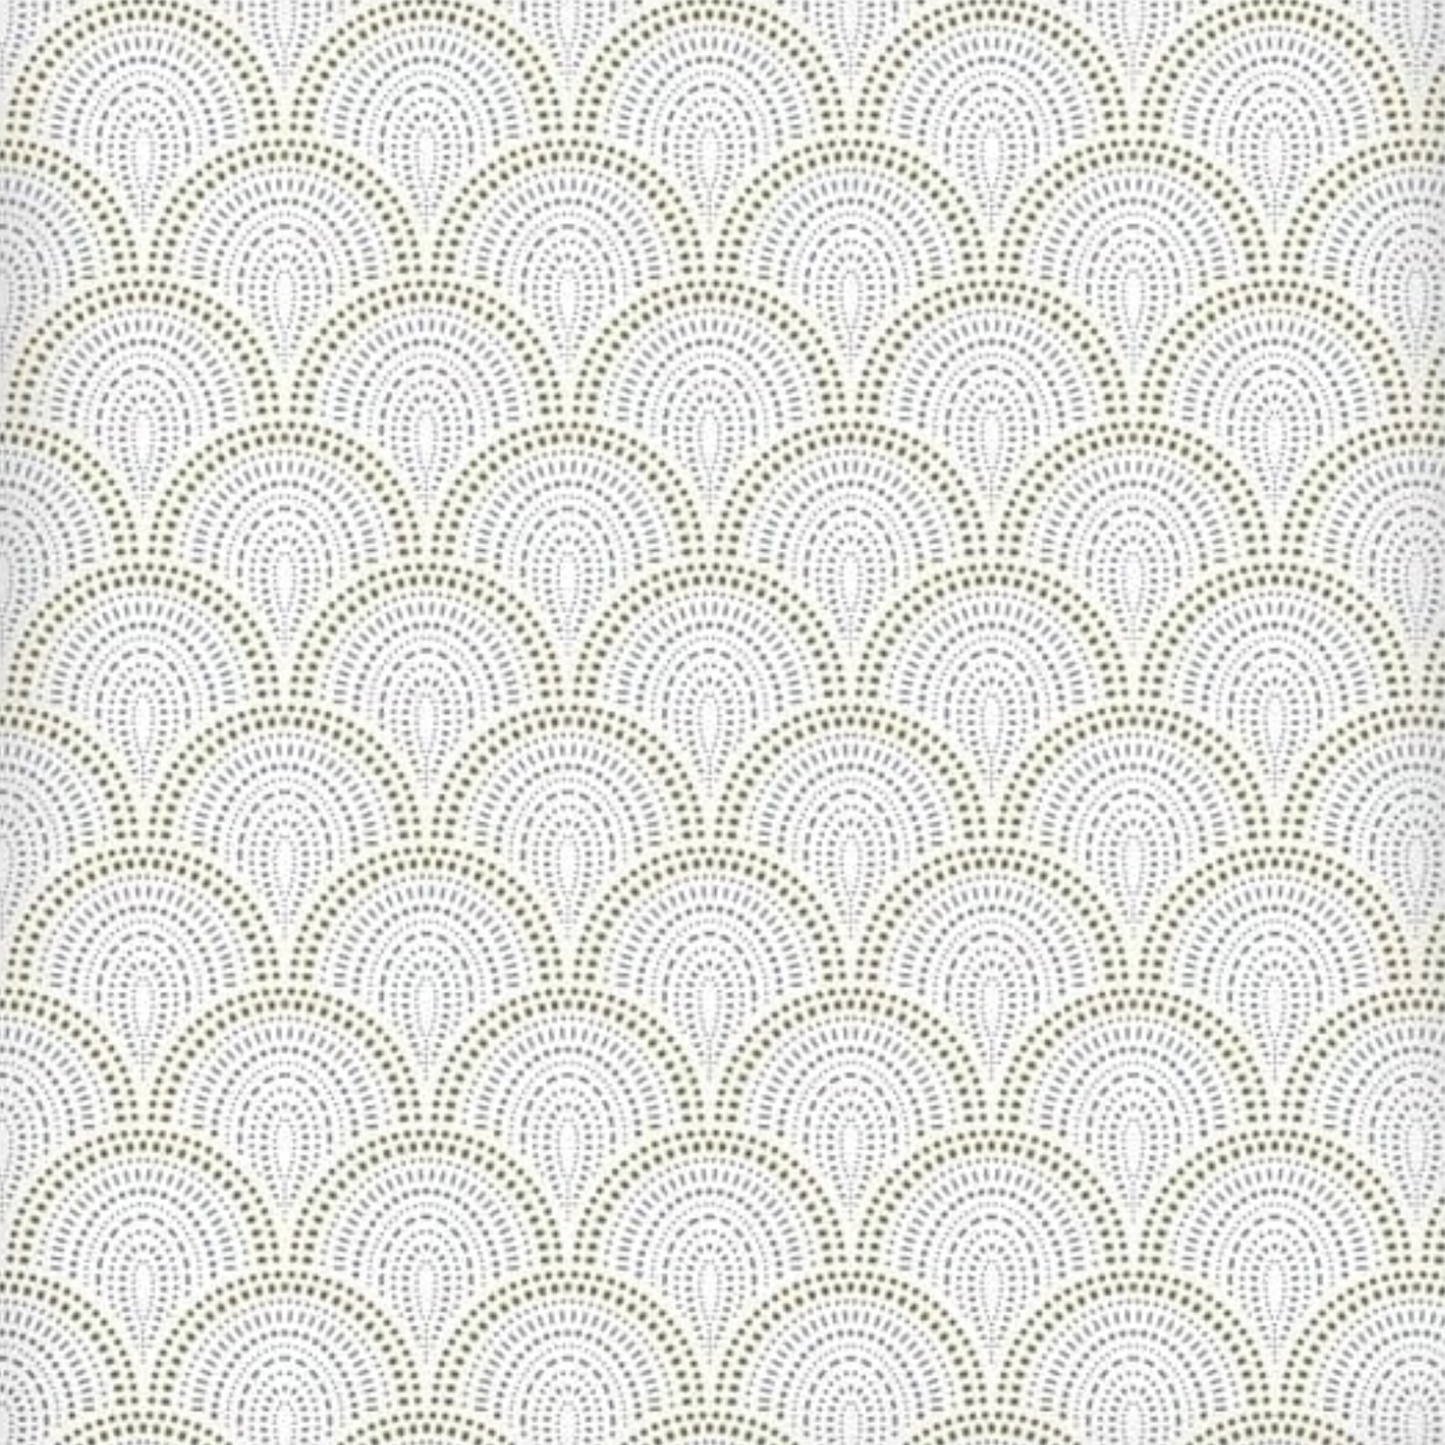 Metallic Rays 2-Ply 13X13 inches Dinner Napkins Tablesettings VeZee   